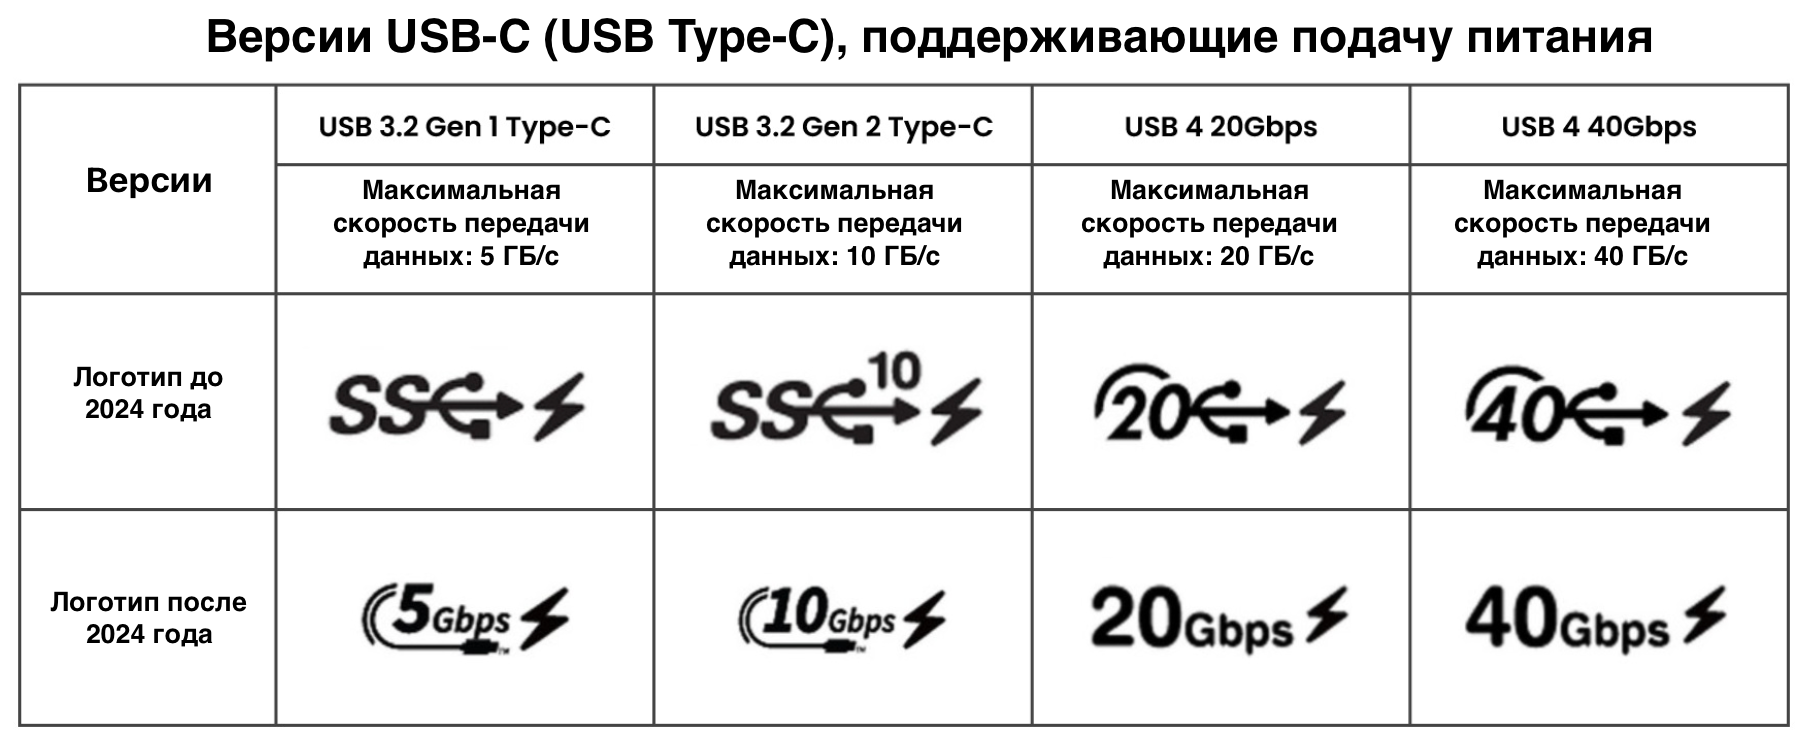 Distinguishing USB-C (USB Type-C) versions that support Power Delivery (PD) from the logo